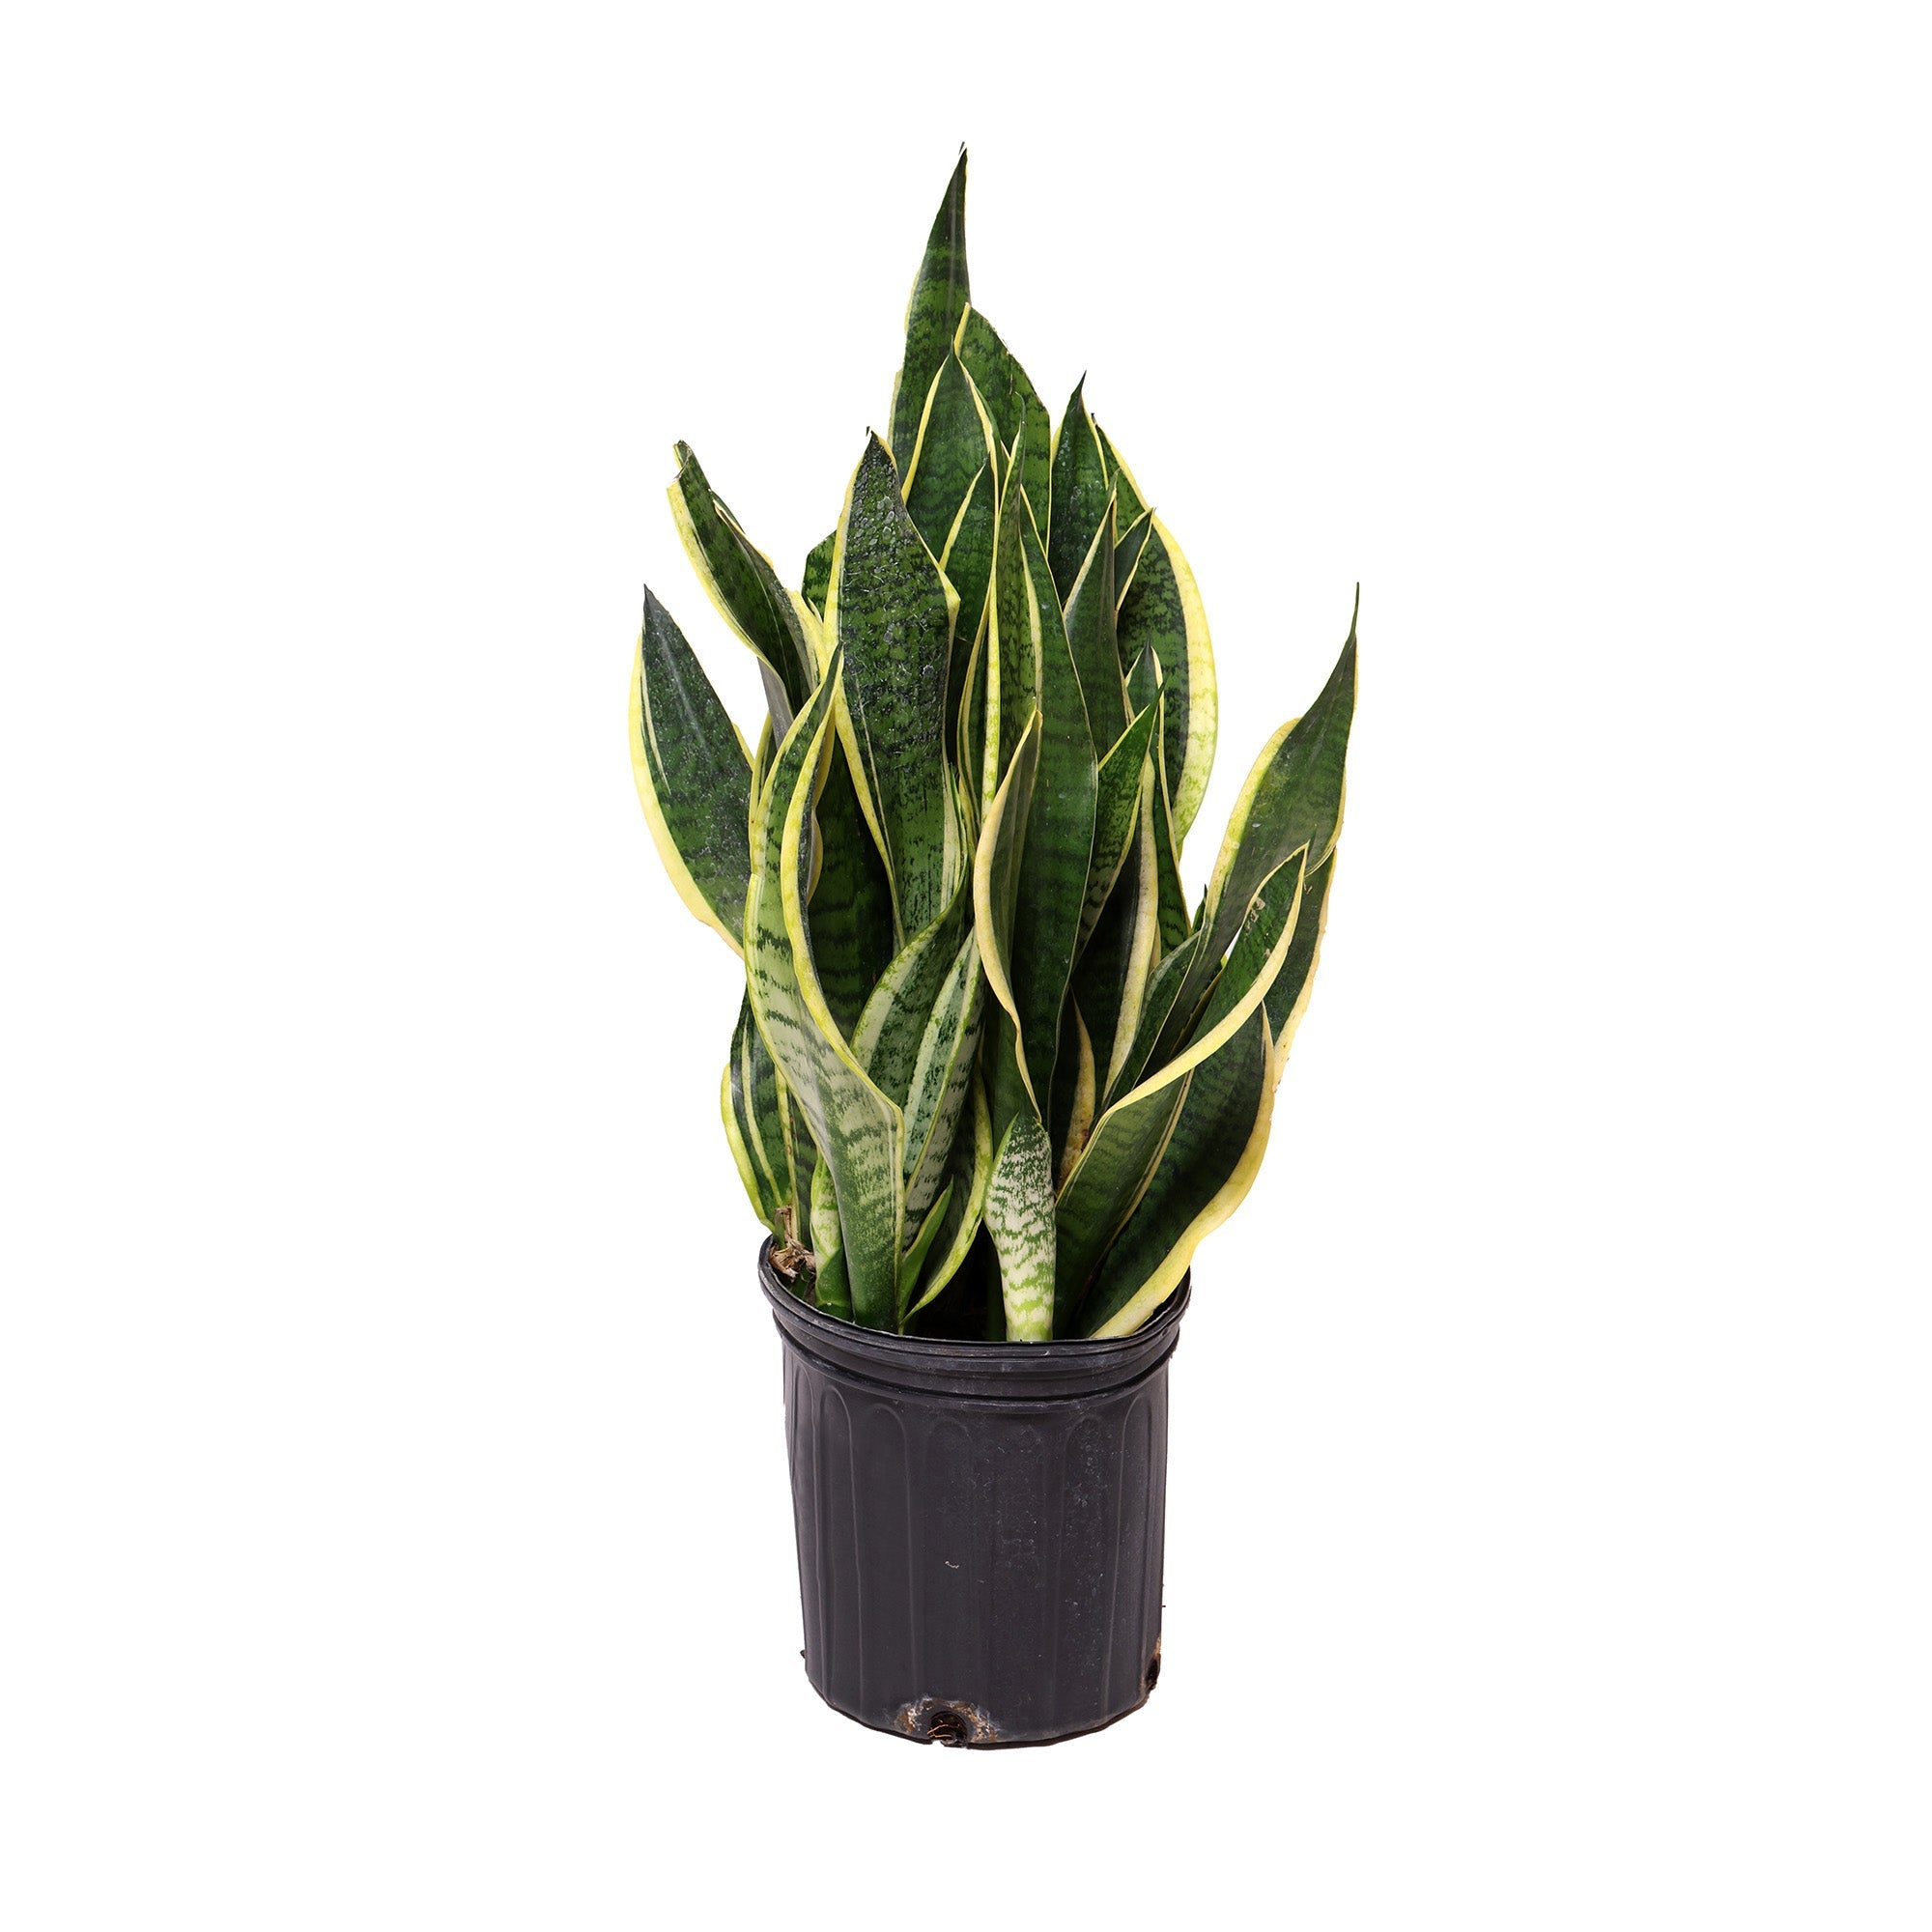 A potted Snake Plant Superba 8 Inches, by Chive Studio, with tall, upright leaves featuring yellow borders and green centers, isolated on a white background.